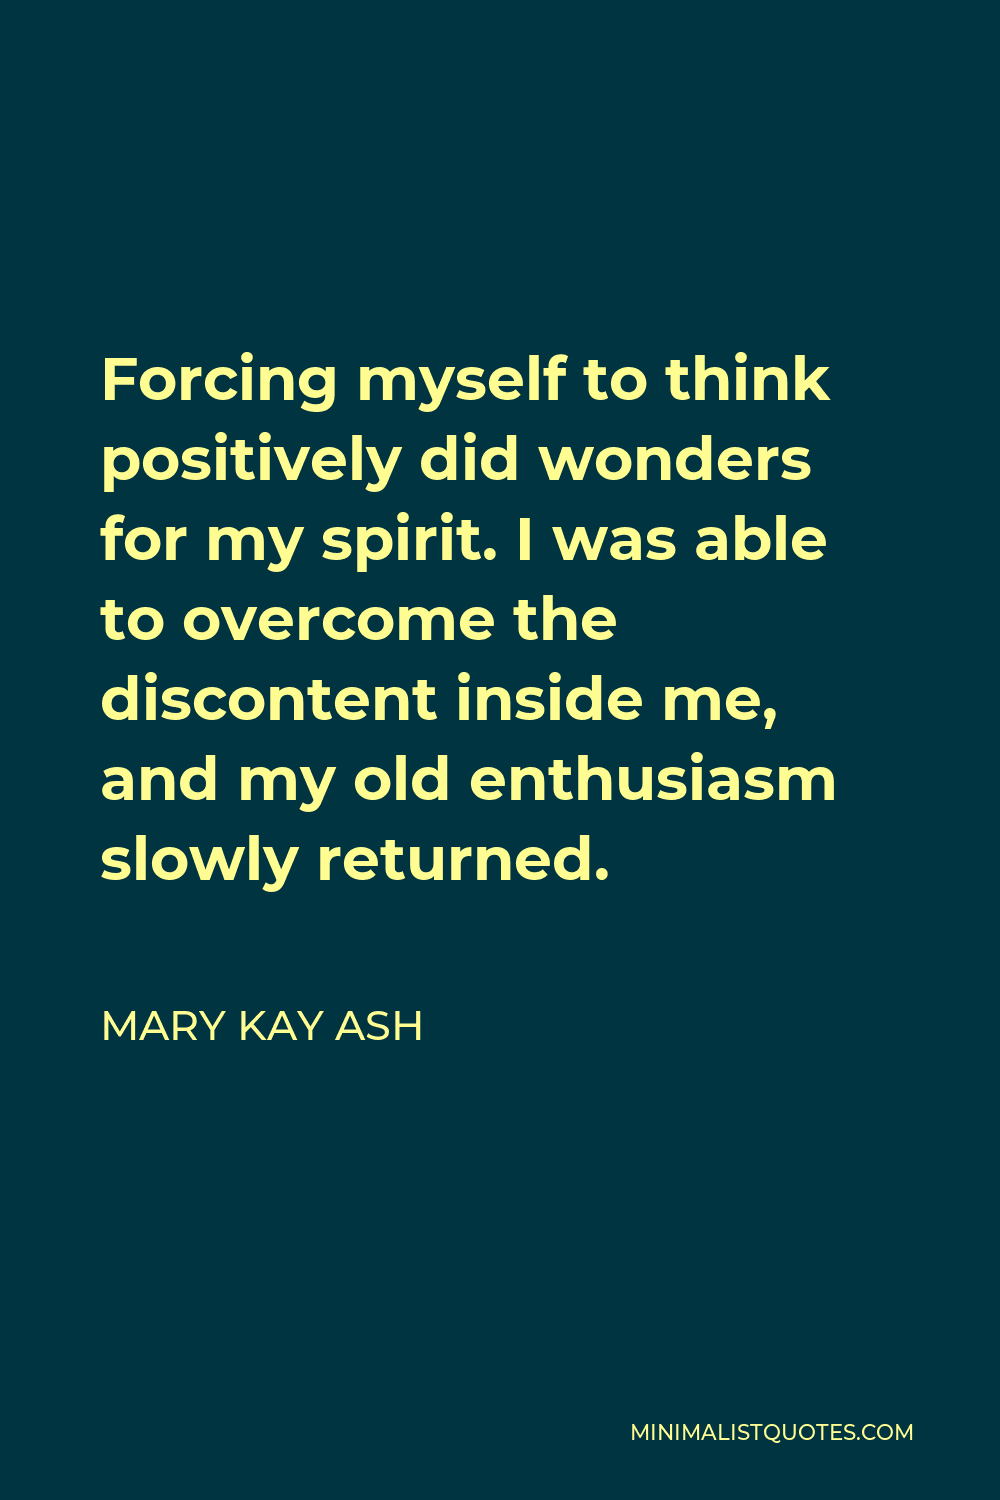 Mary Kay Ash Quote - Forcing myself to think positively did wonders for my spirit. I was able to overcome the discontent inside me, and my old enthusiasm slowly returned.